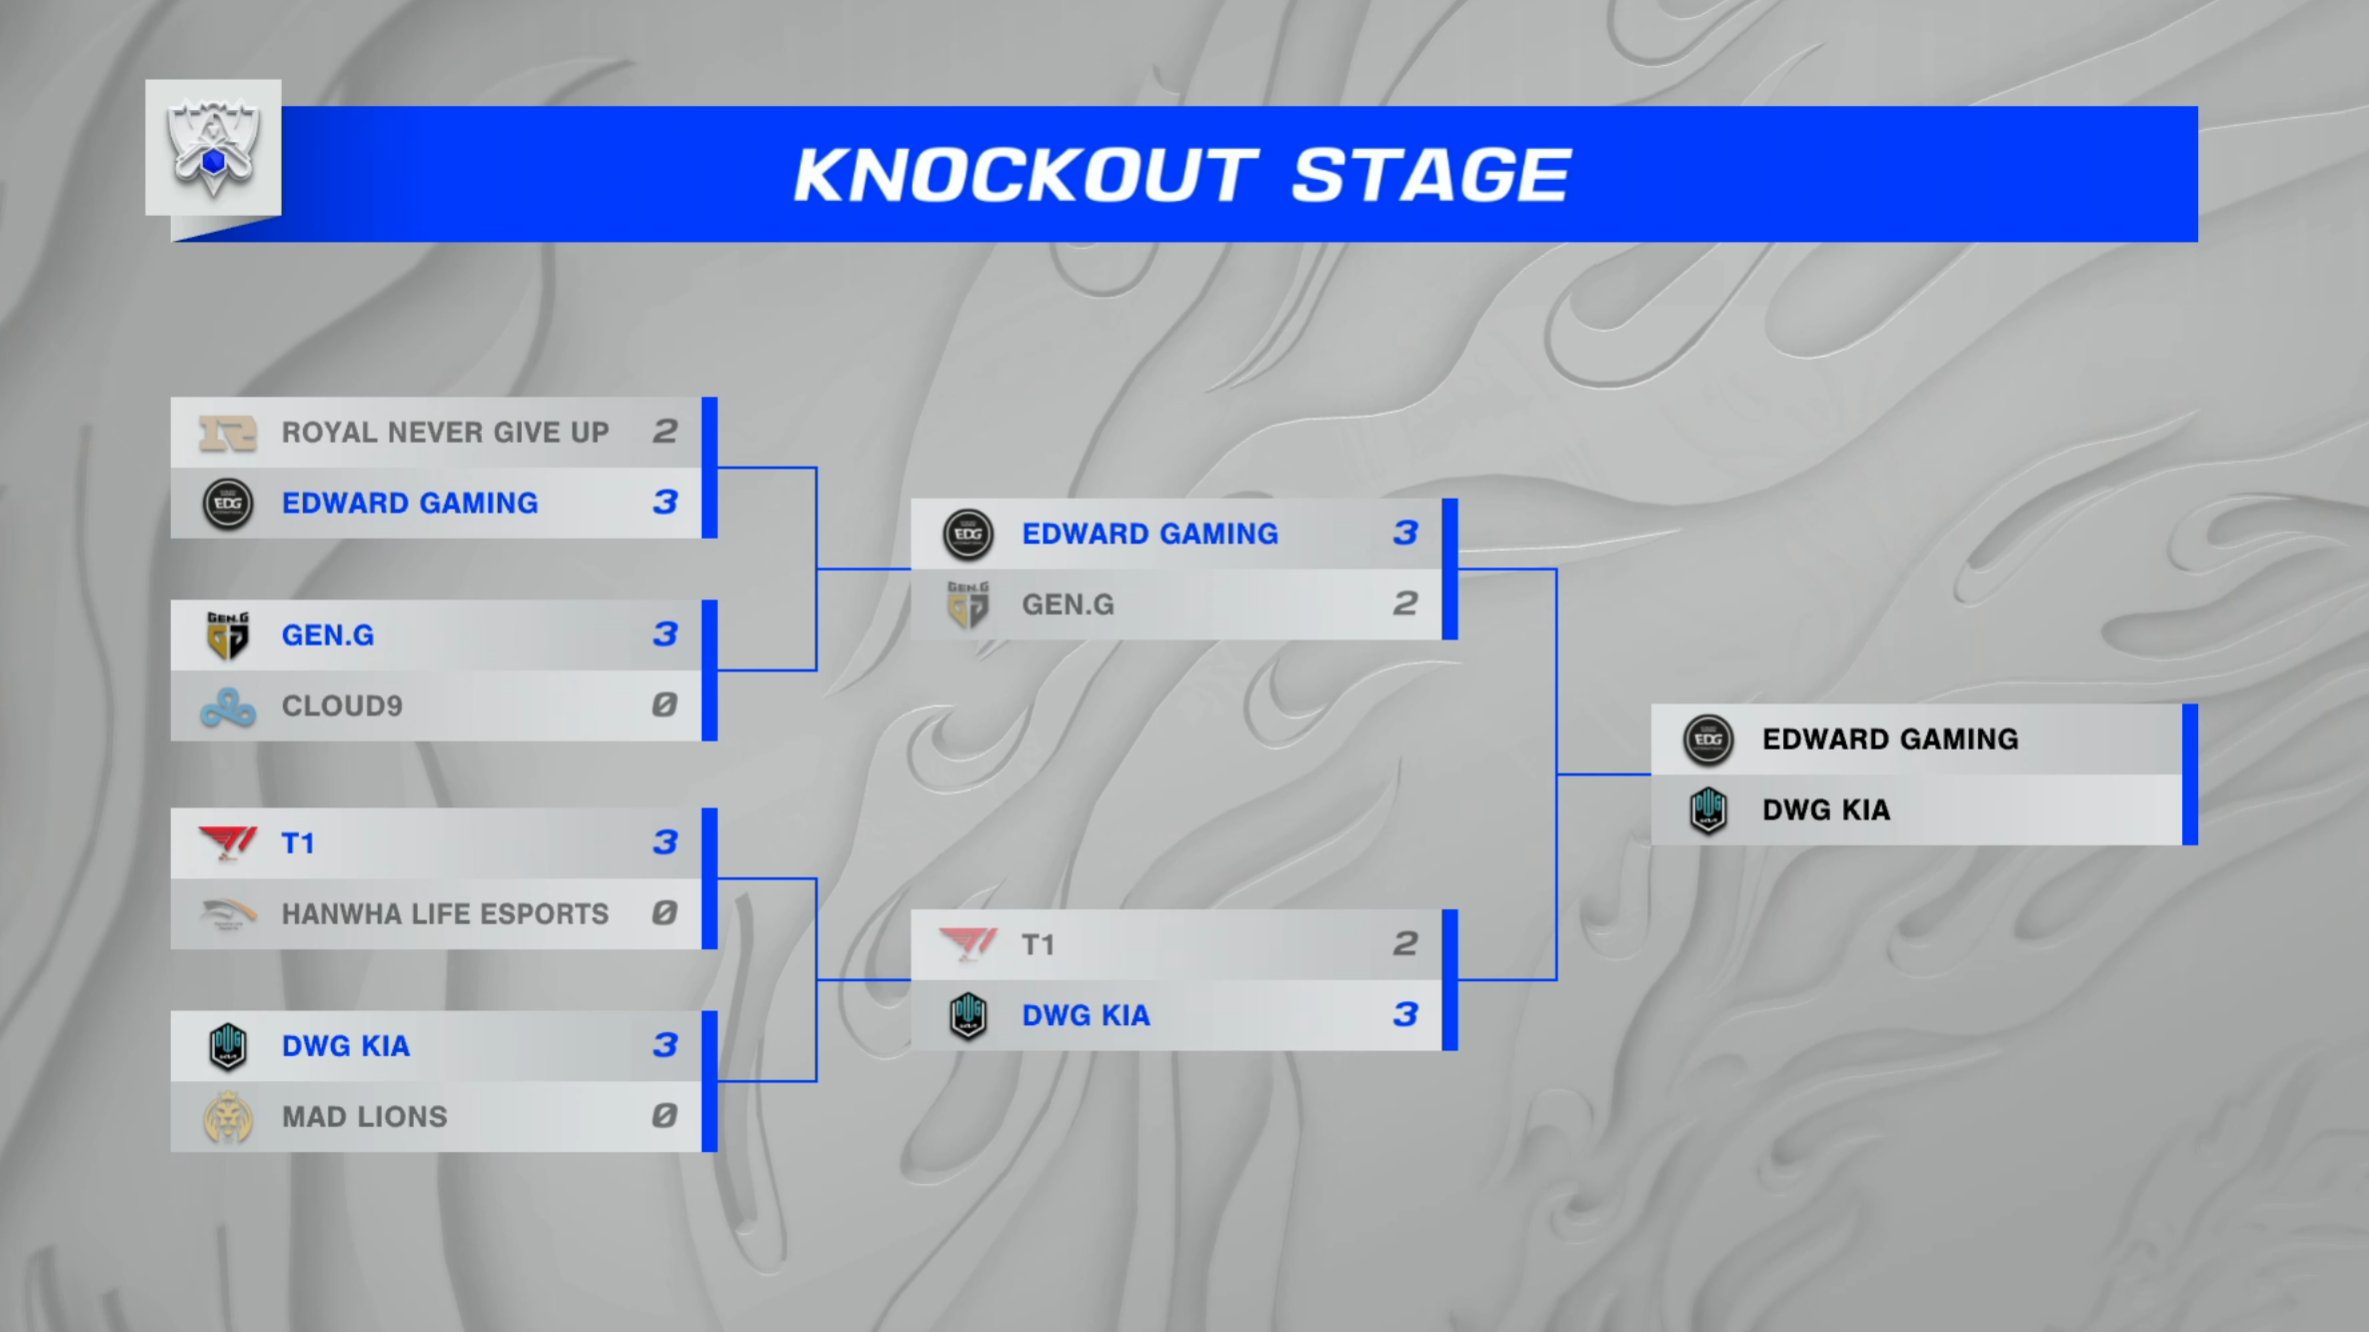 The Worlds knockout stage, showing the single elim format